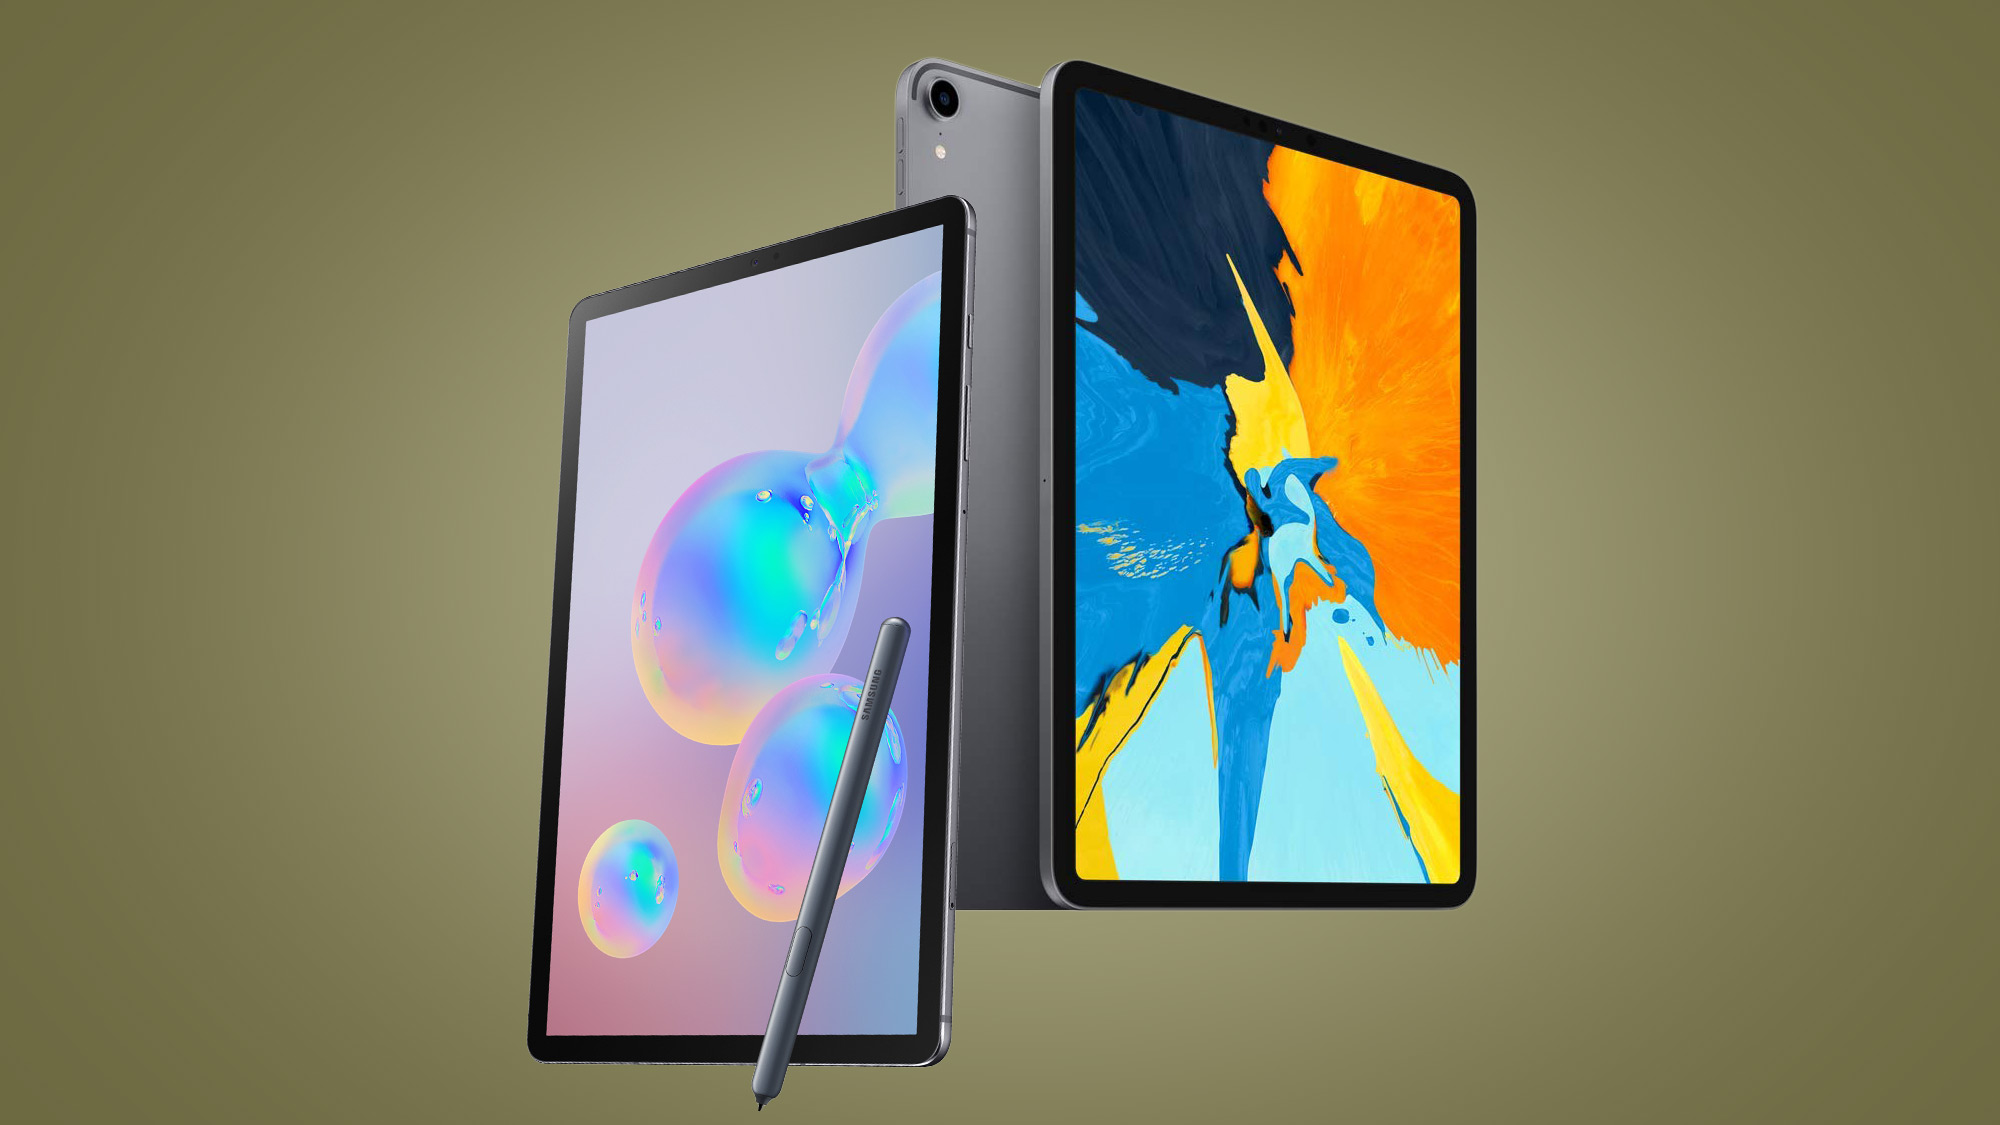 samsung-galaxy-tab-s4-vs-ipad-pro-which-pro-tablet-takes-the-crown